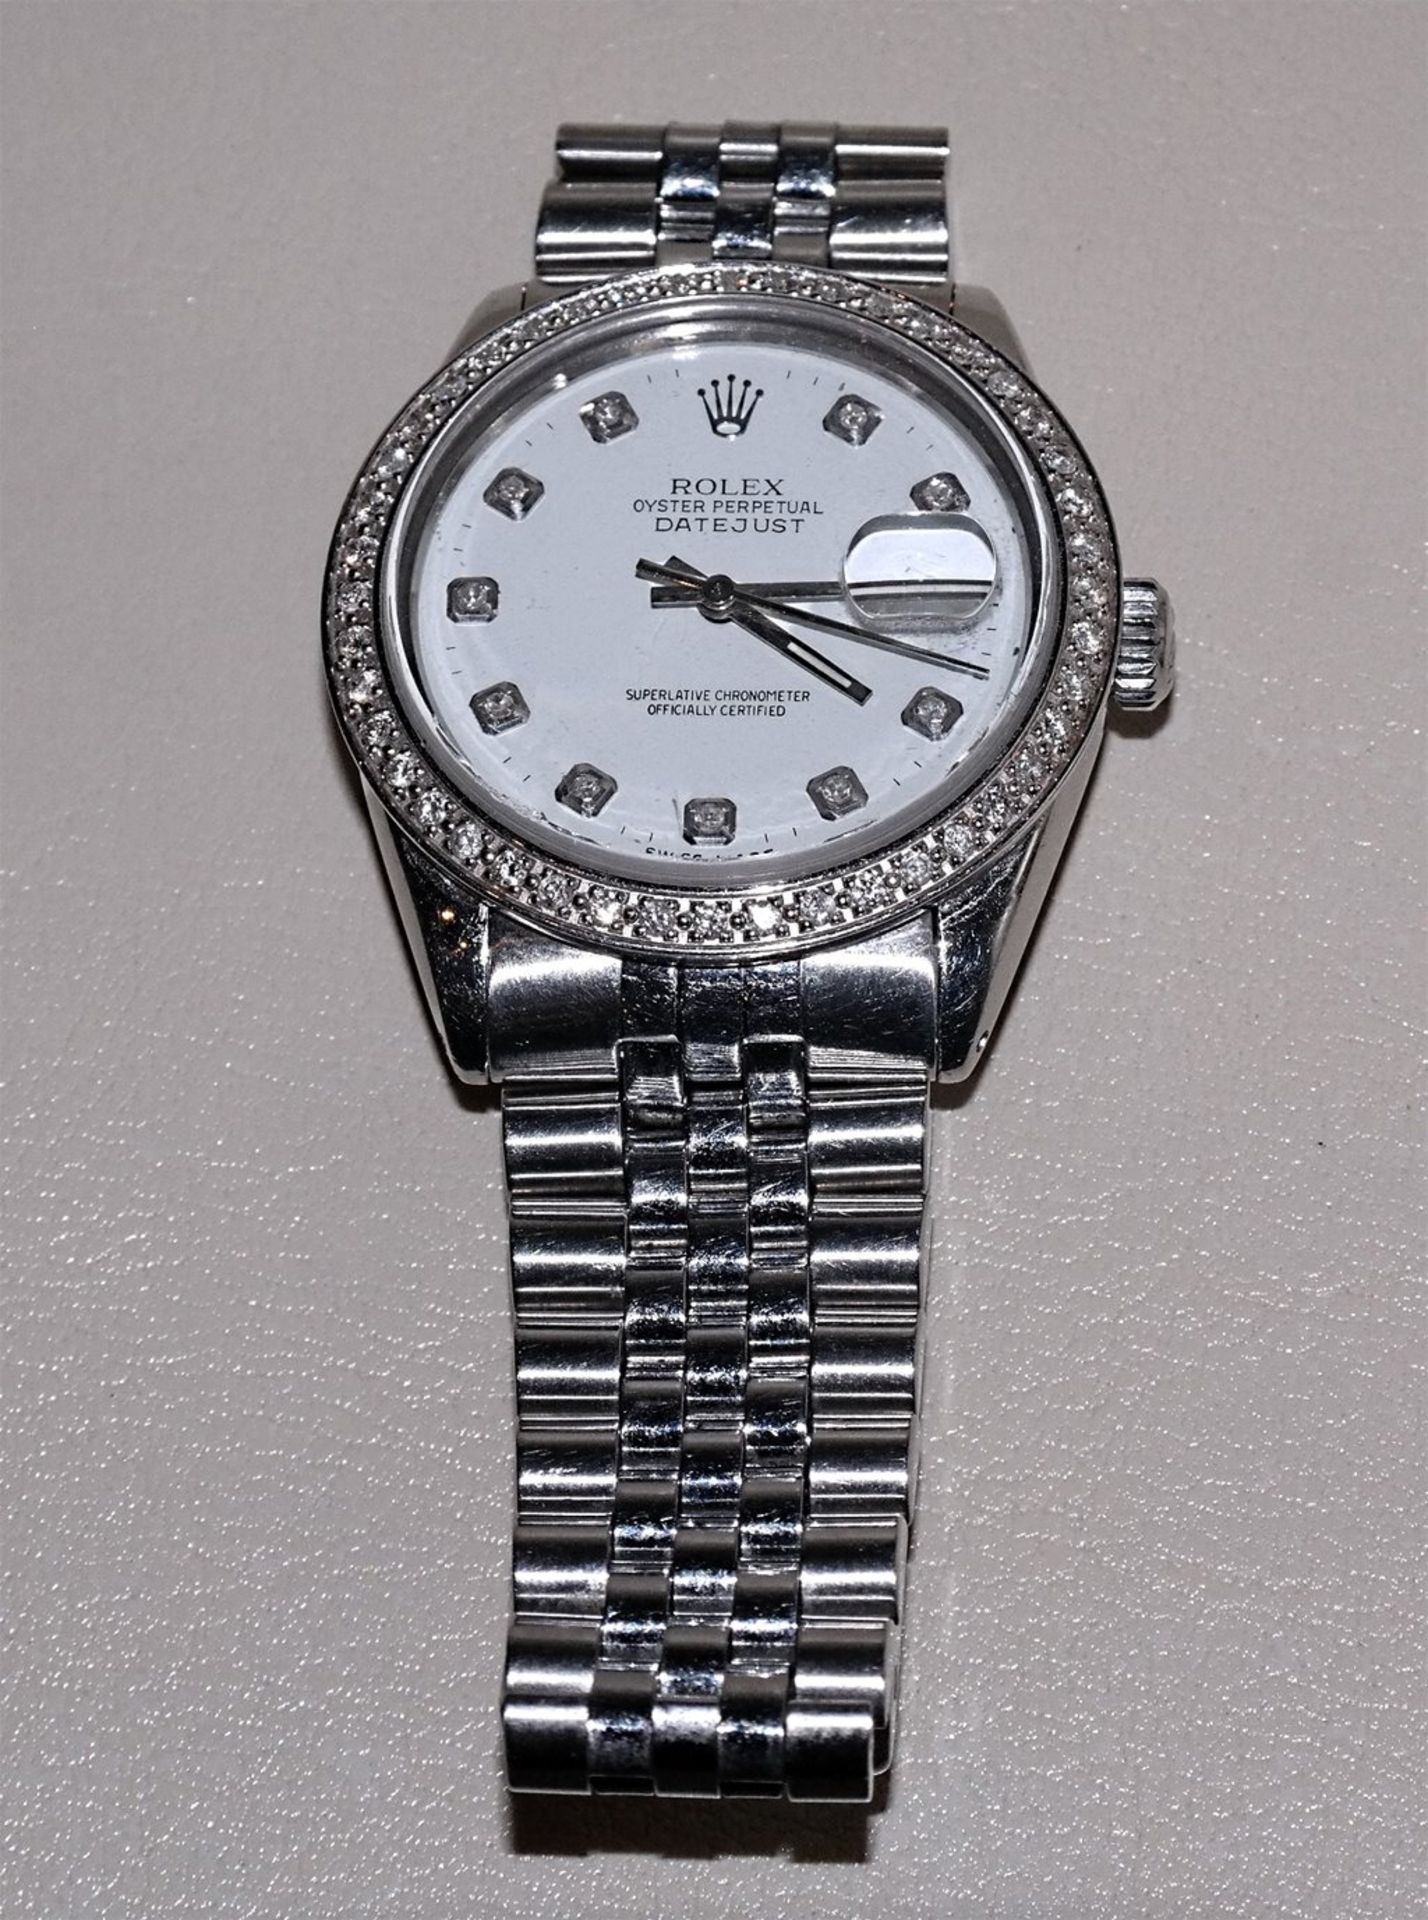 Mens Rolex Oyster Perpetual Datejust, White Diamond Dial 36mm - Image 2 of 5